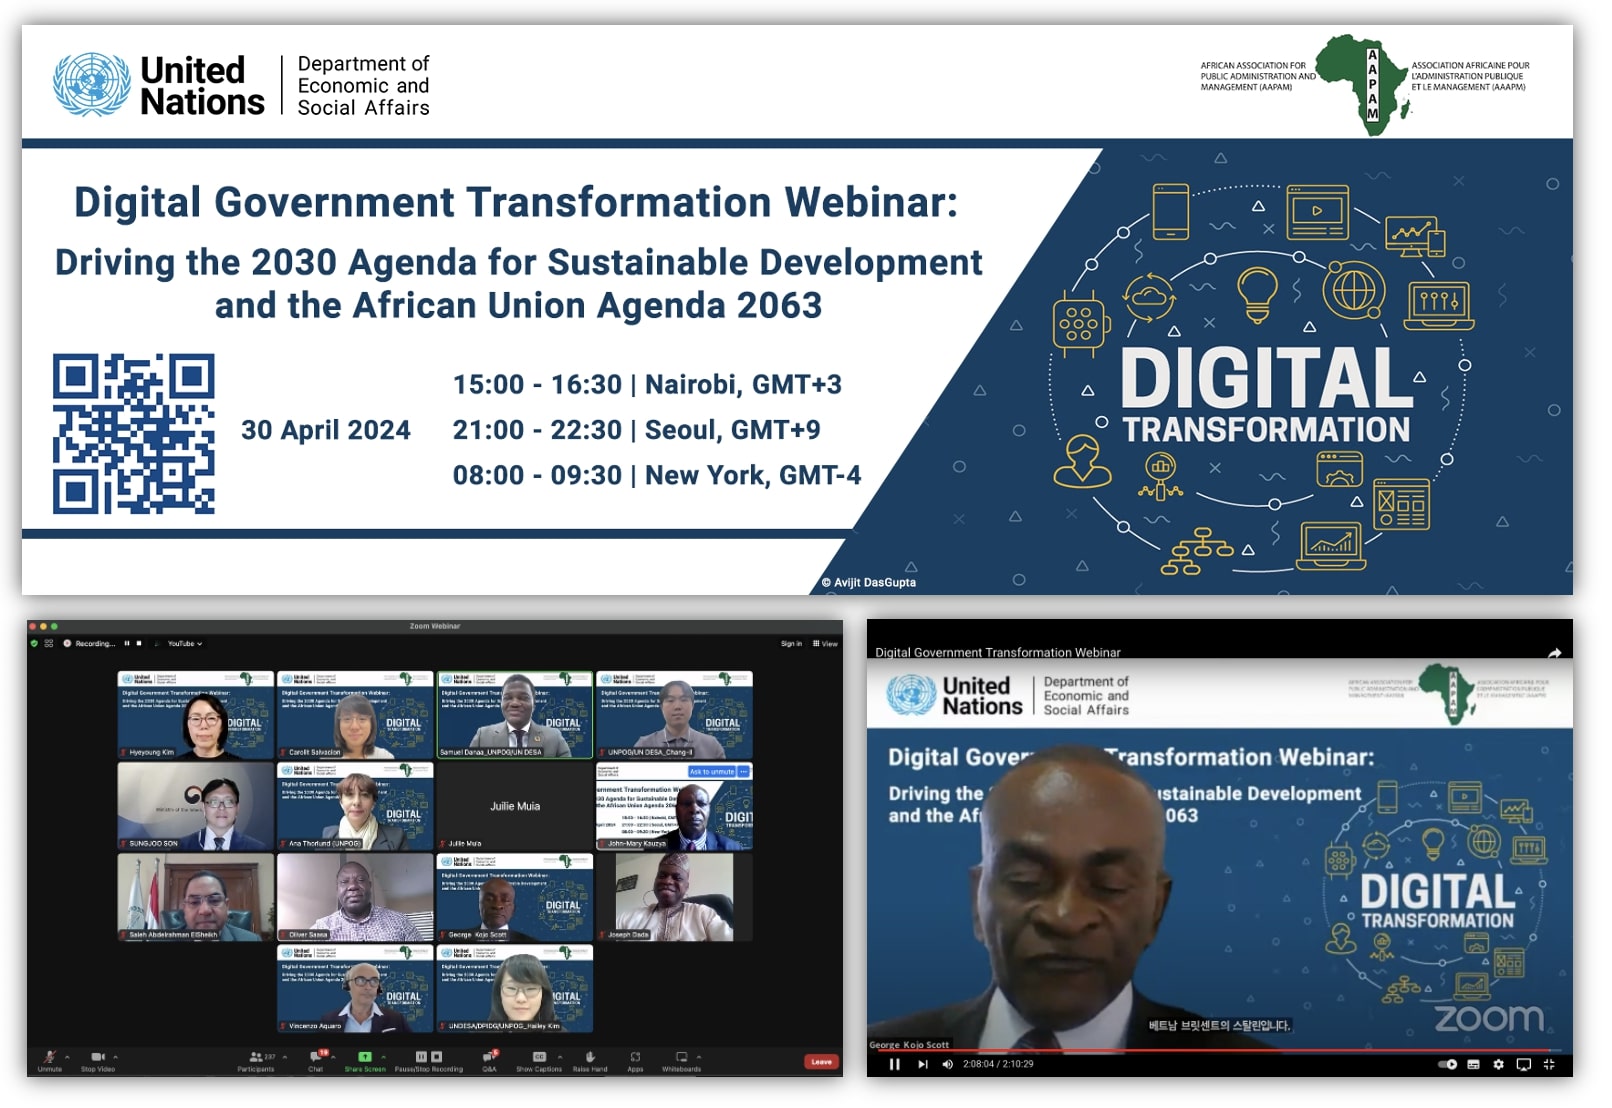 UNPOG/DPIDG and AAPAM Hosts Interactive Digital Government Transformation Webinar to Drive the 2030 Agenda for Sustainable Development and the African Union Agenda 2063